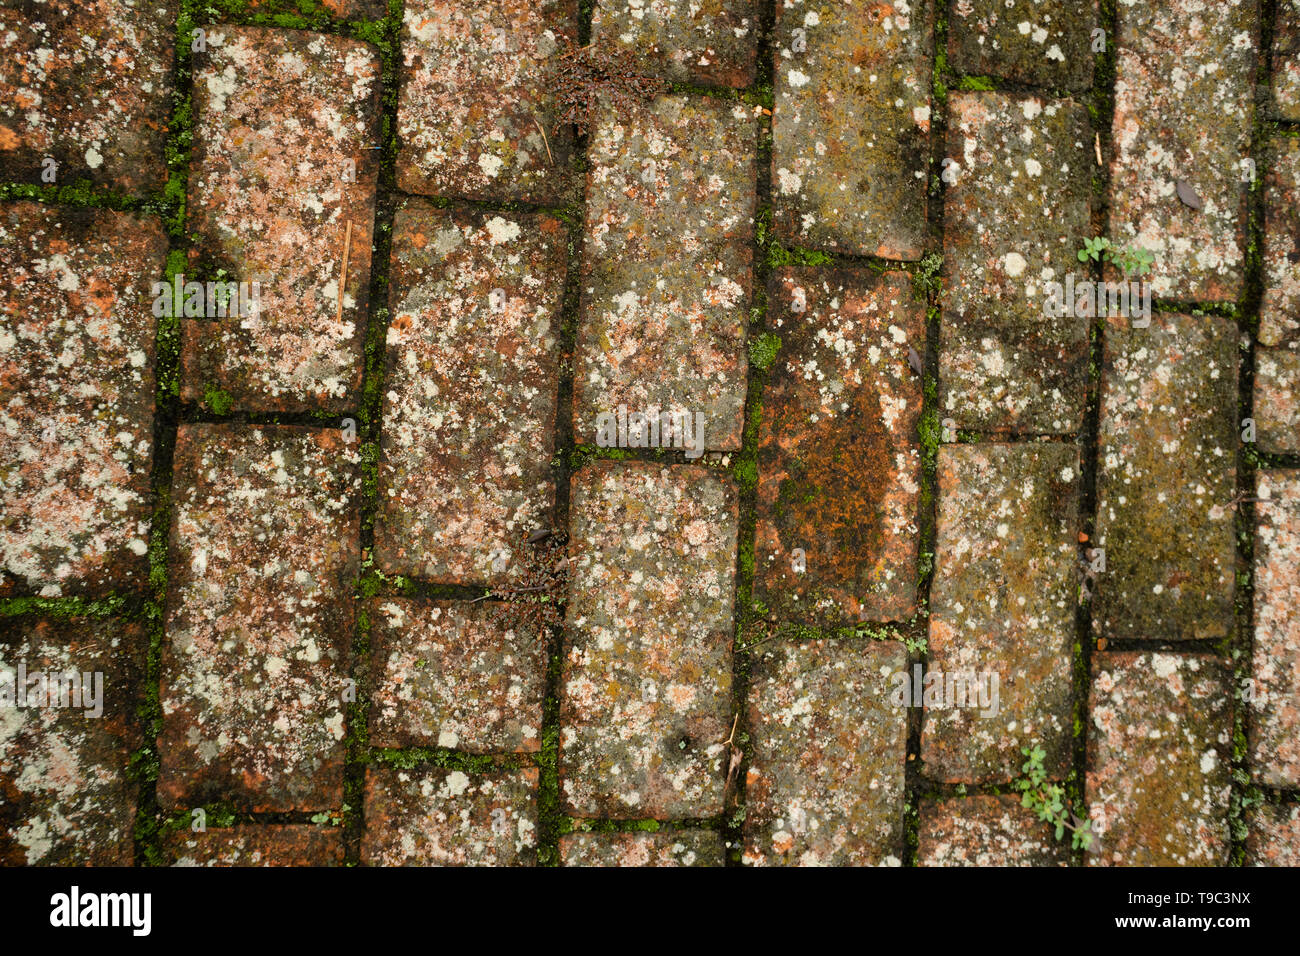 Old brick flooring with moss and lychen growth Stock Photo